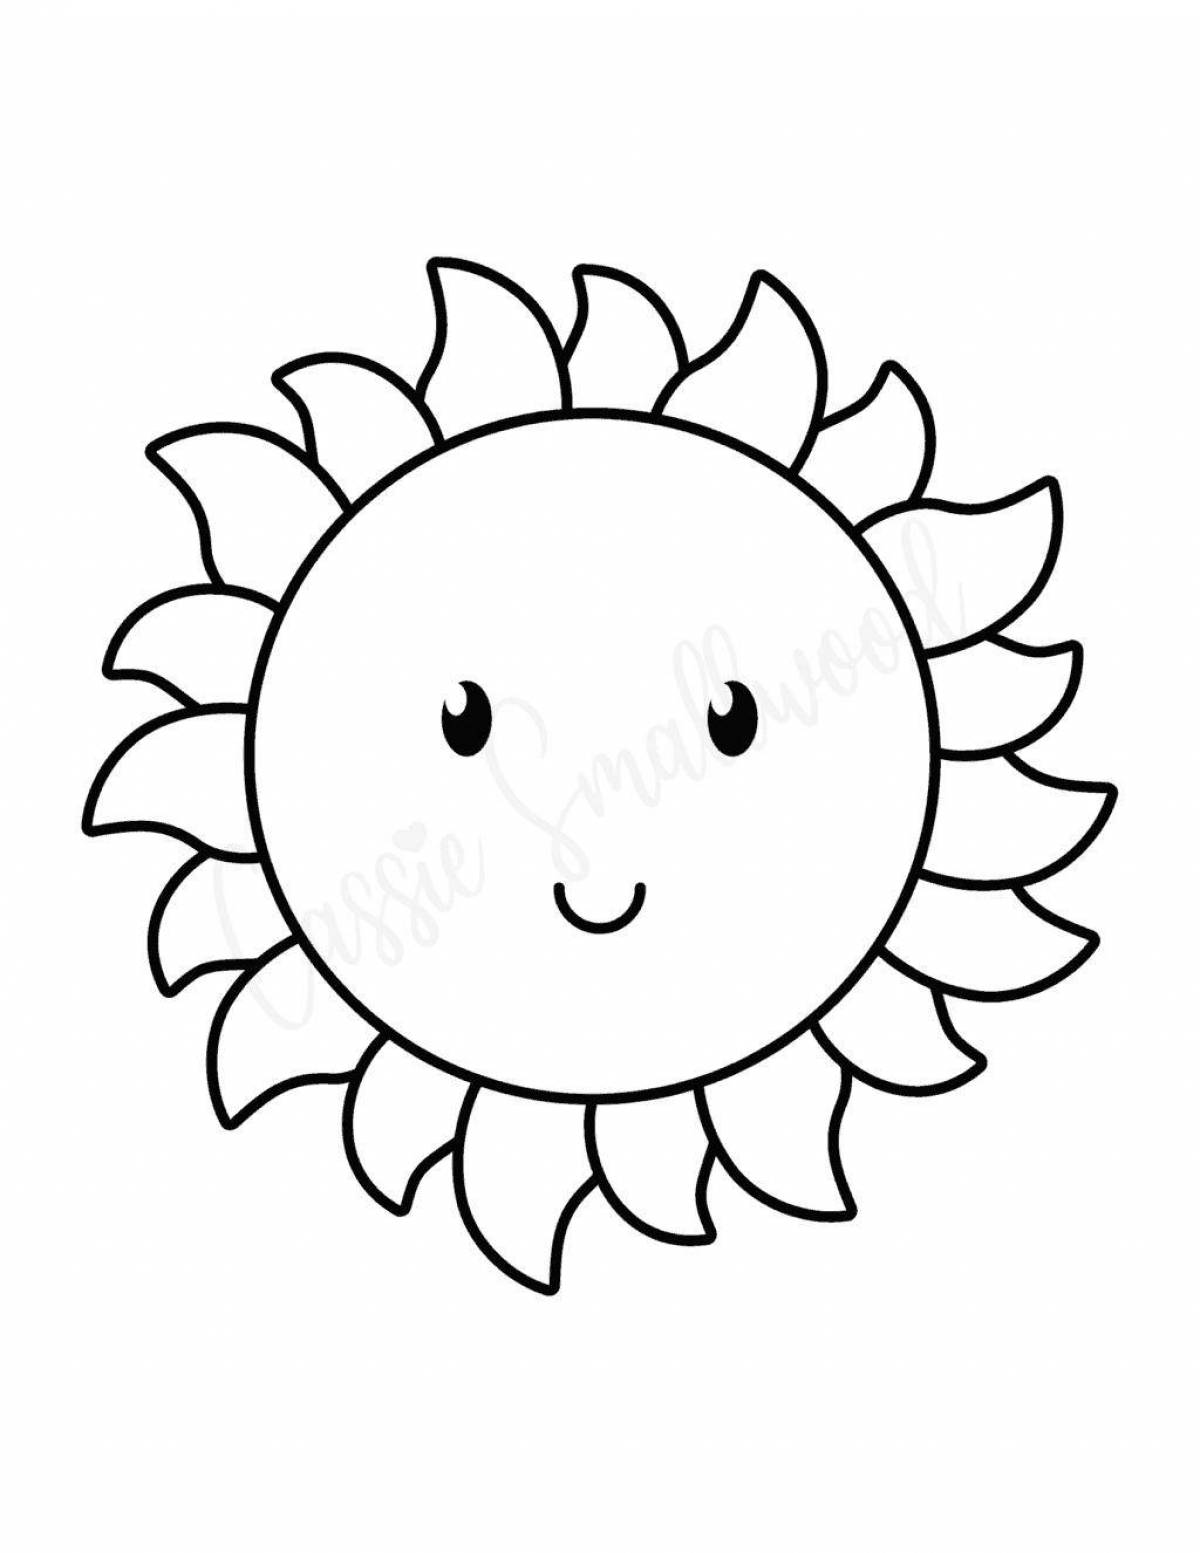 Blissful sun coloring page